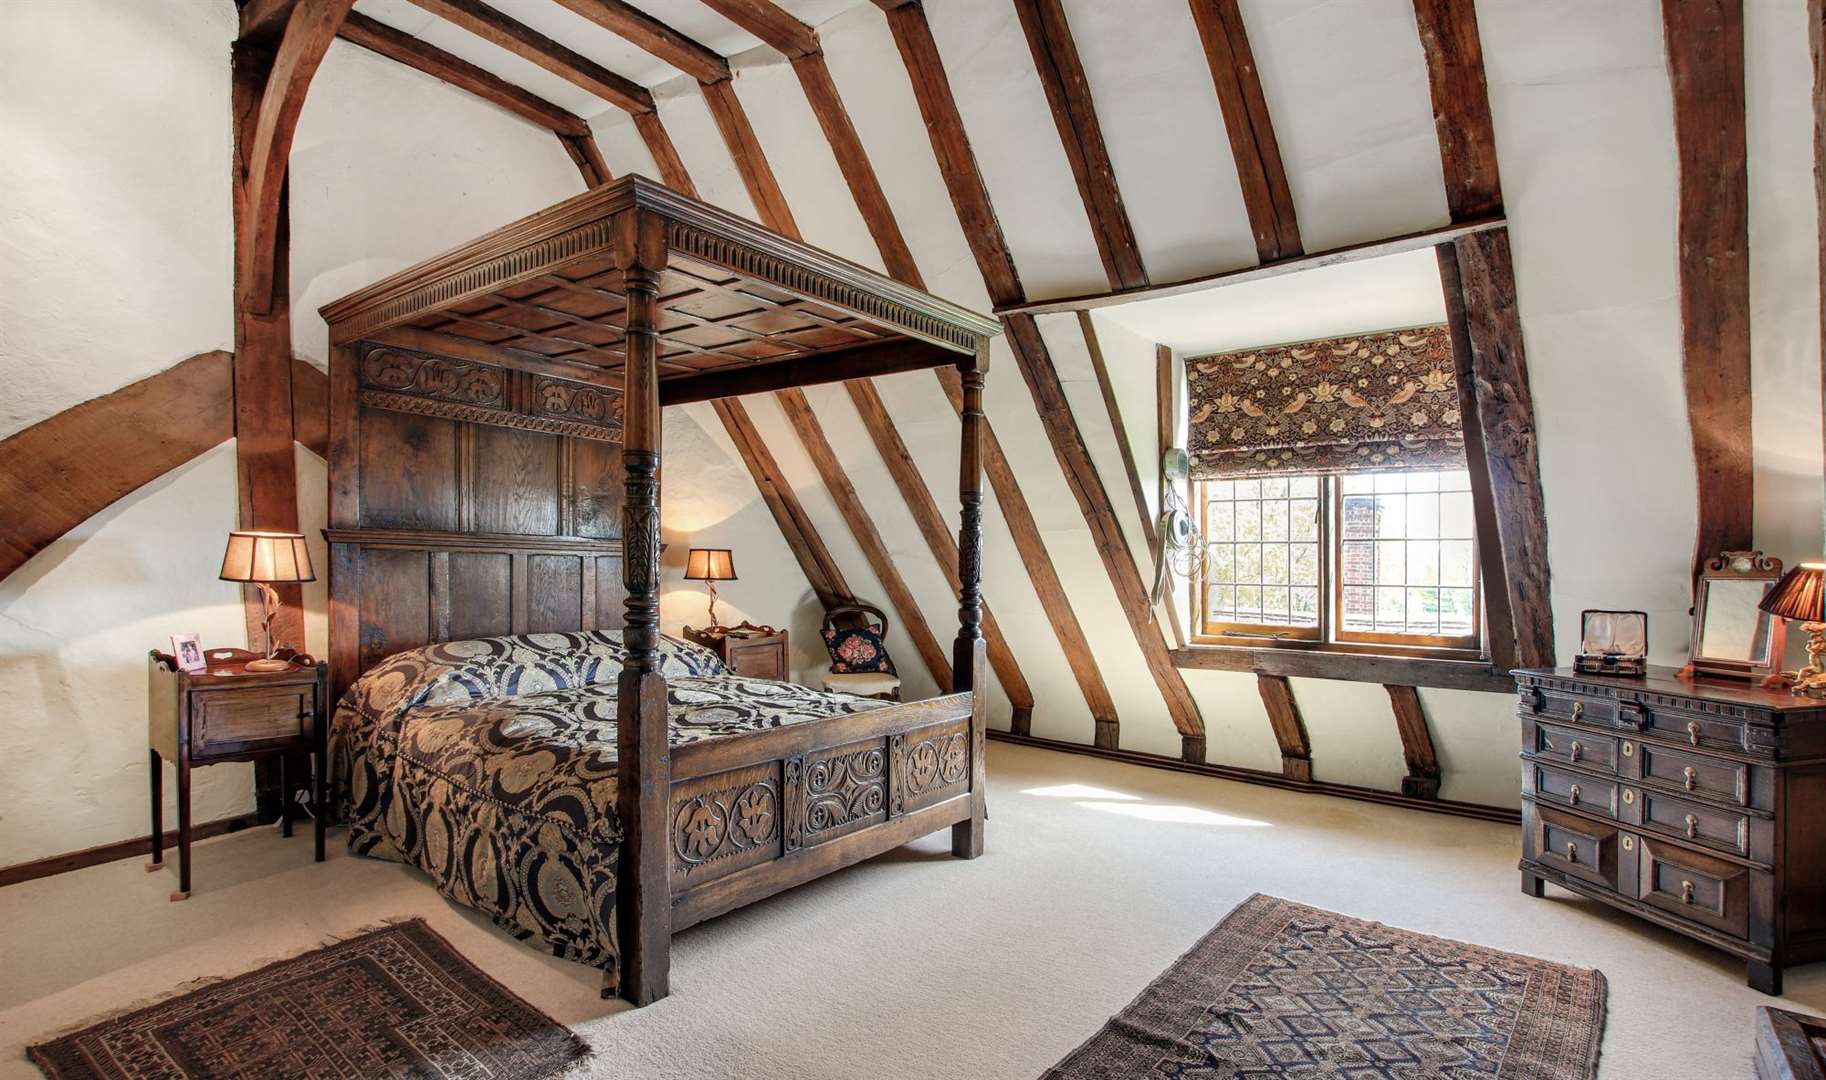 The King is said to have slept in the attic during his time at the property. Picture: Savills